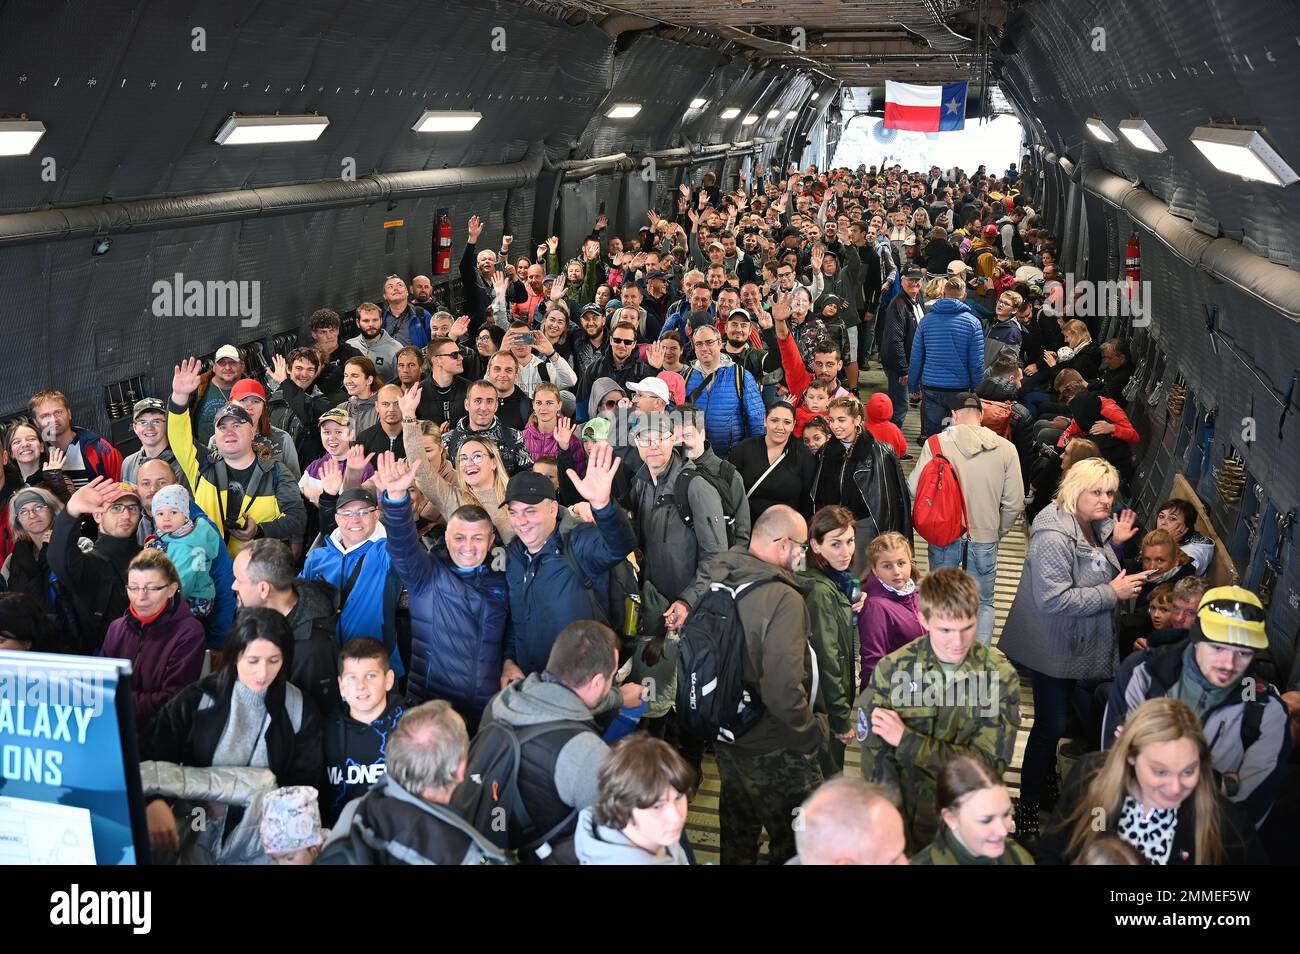 NATO Days air show participants smile and wave as they walk through a C-5M Super Galaxy aircraft in Ostrava, Czech Republic Sept. 17, 2022. The C-5M was the largest aircraft on display during the two-day event. Stock Photo